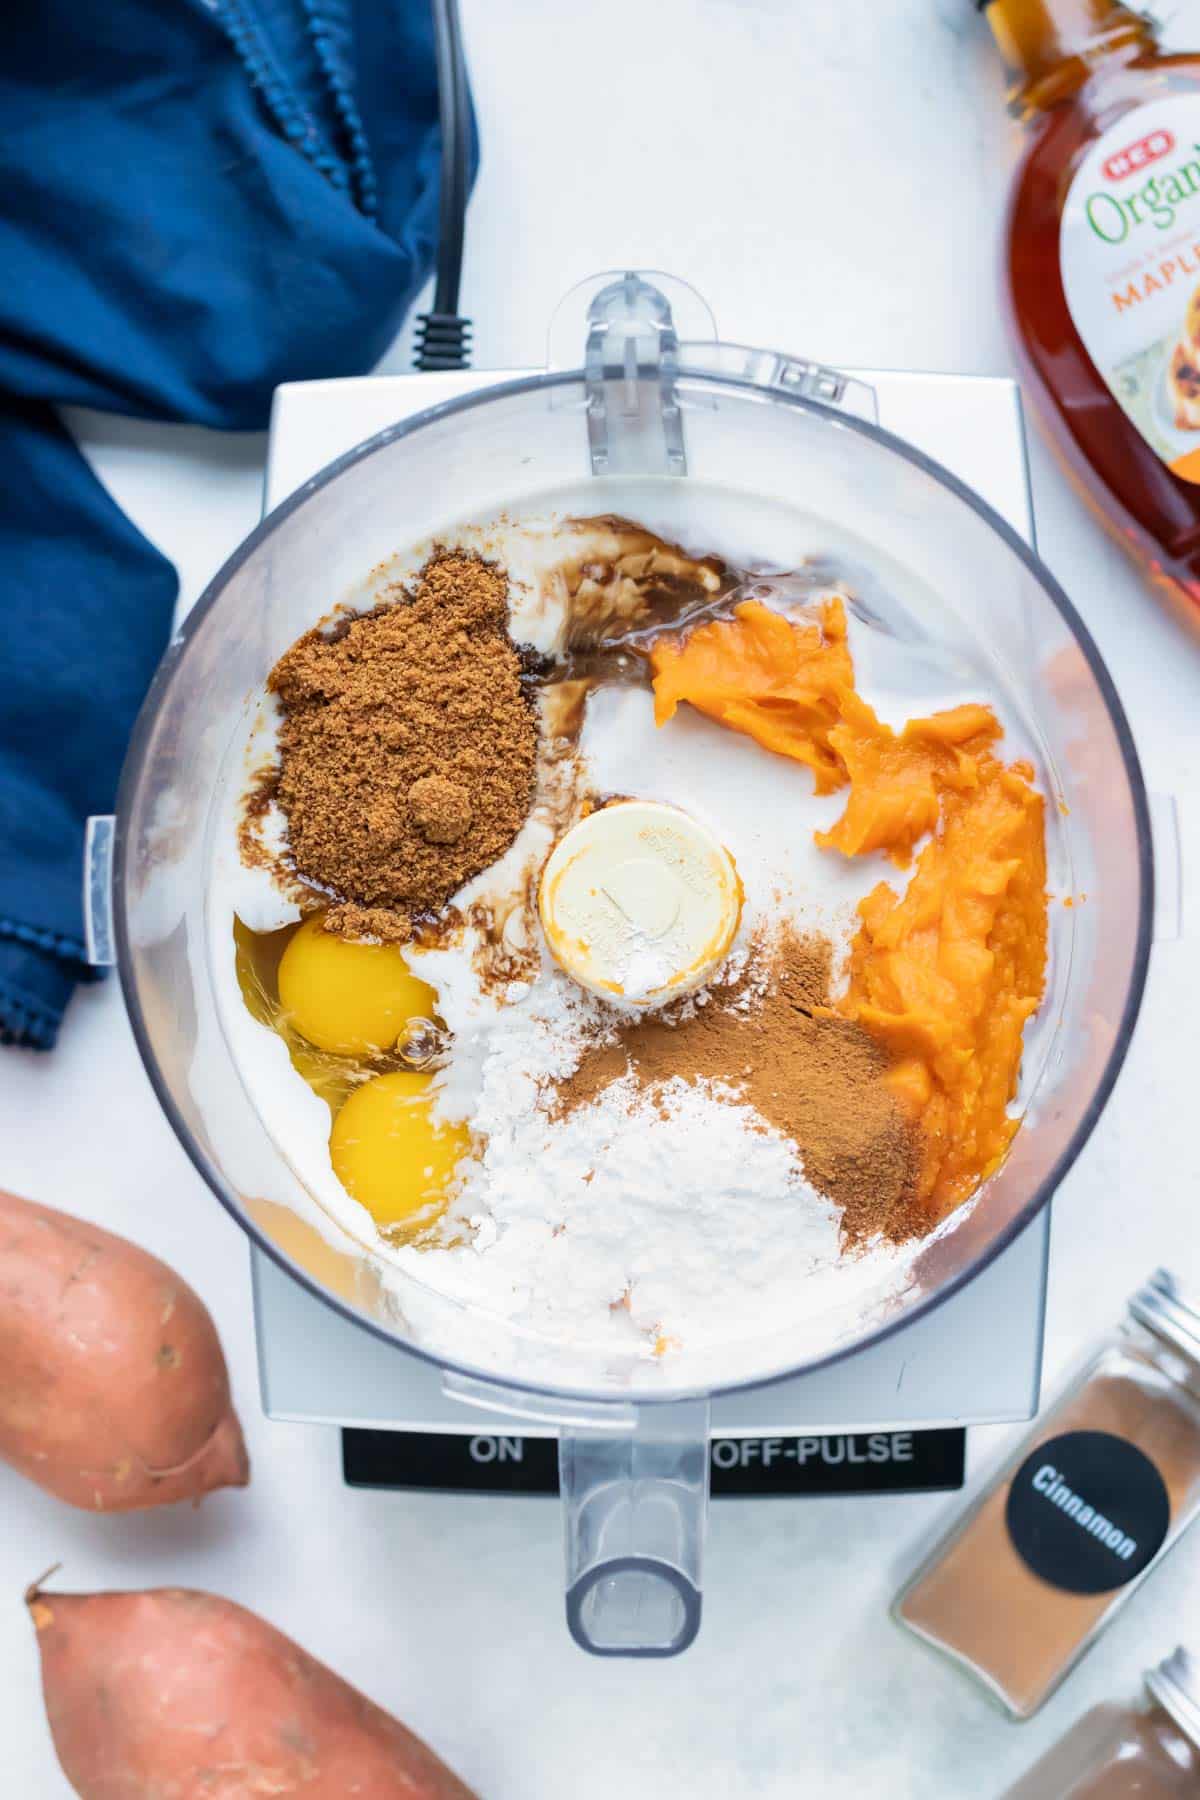 Sweet potato puree, eggs, spices, sweeteners, and other filling ingredients are combined in a food processor.